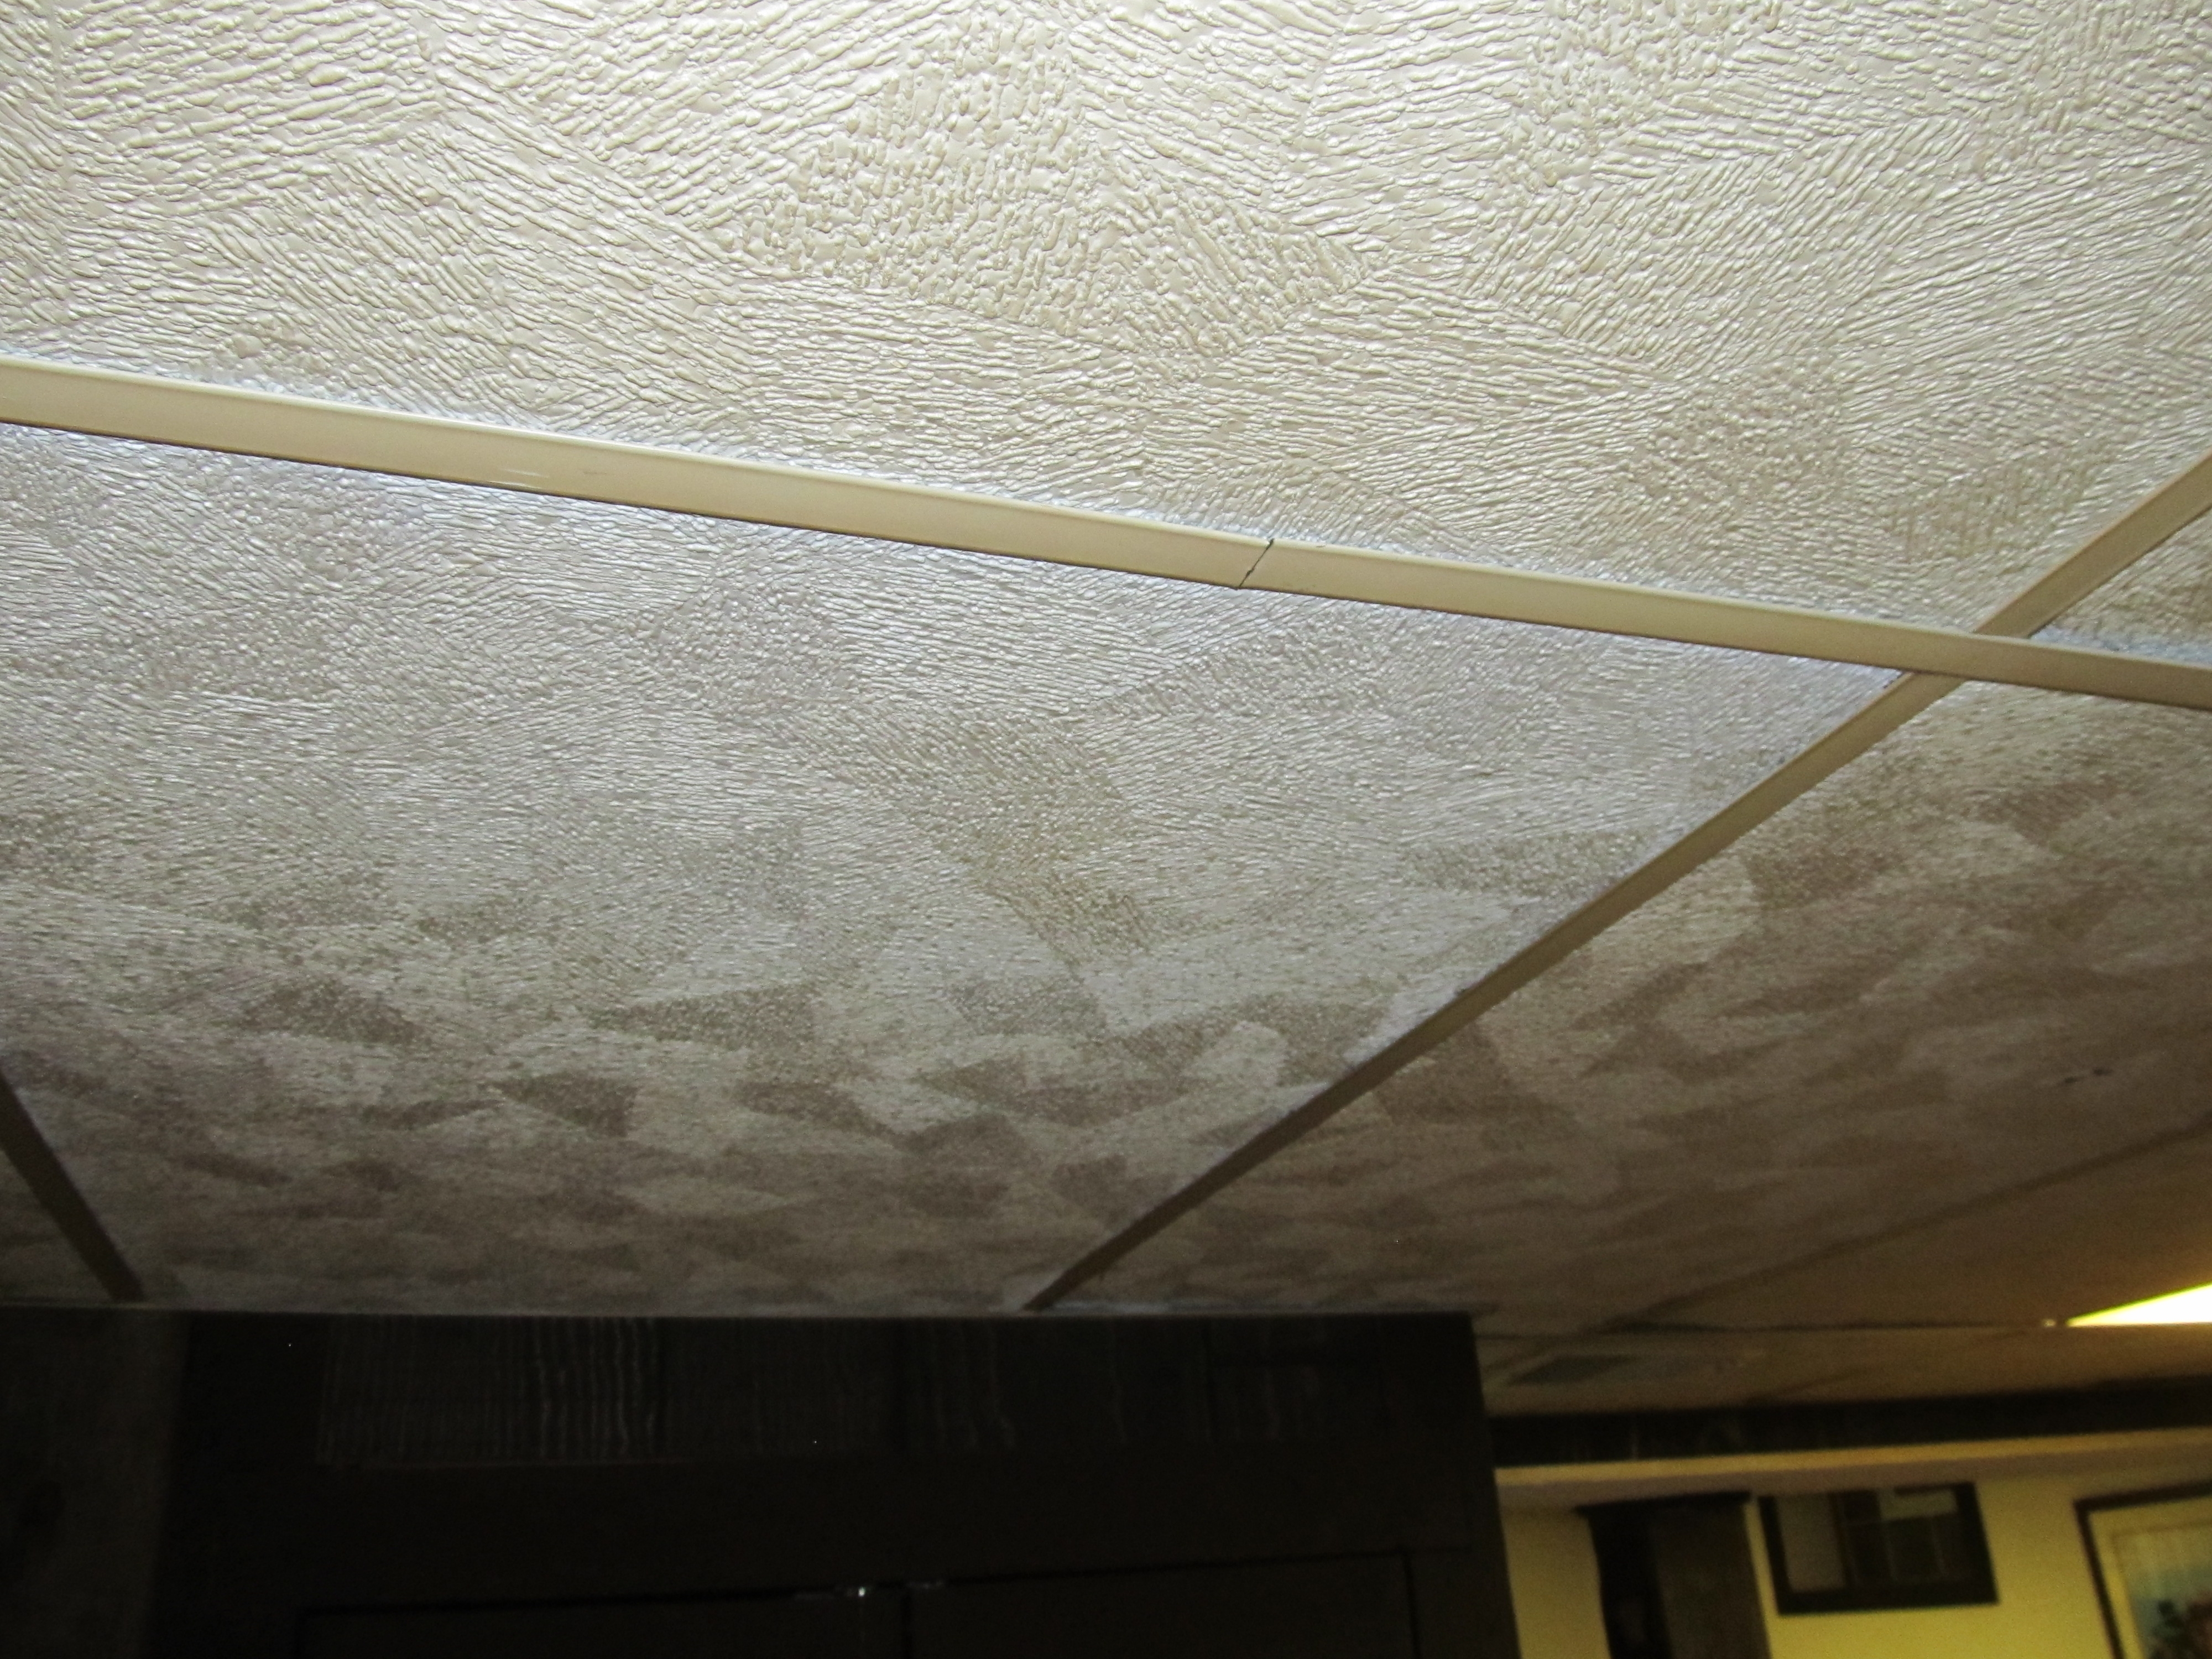 Permalink to Covering Drop Ceiling Tiles With Fabric